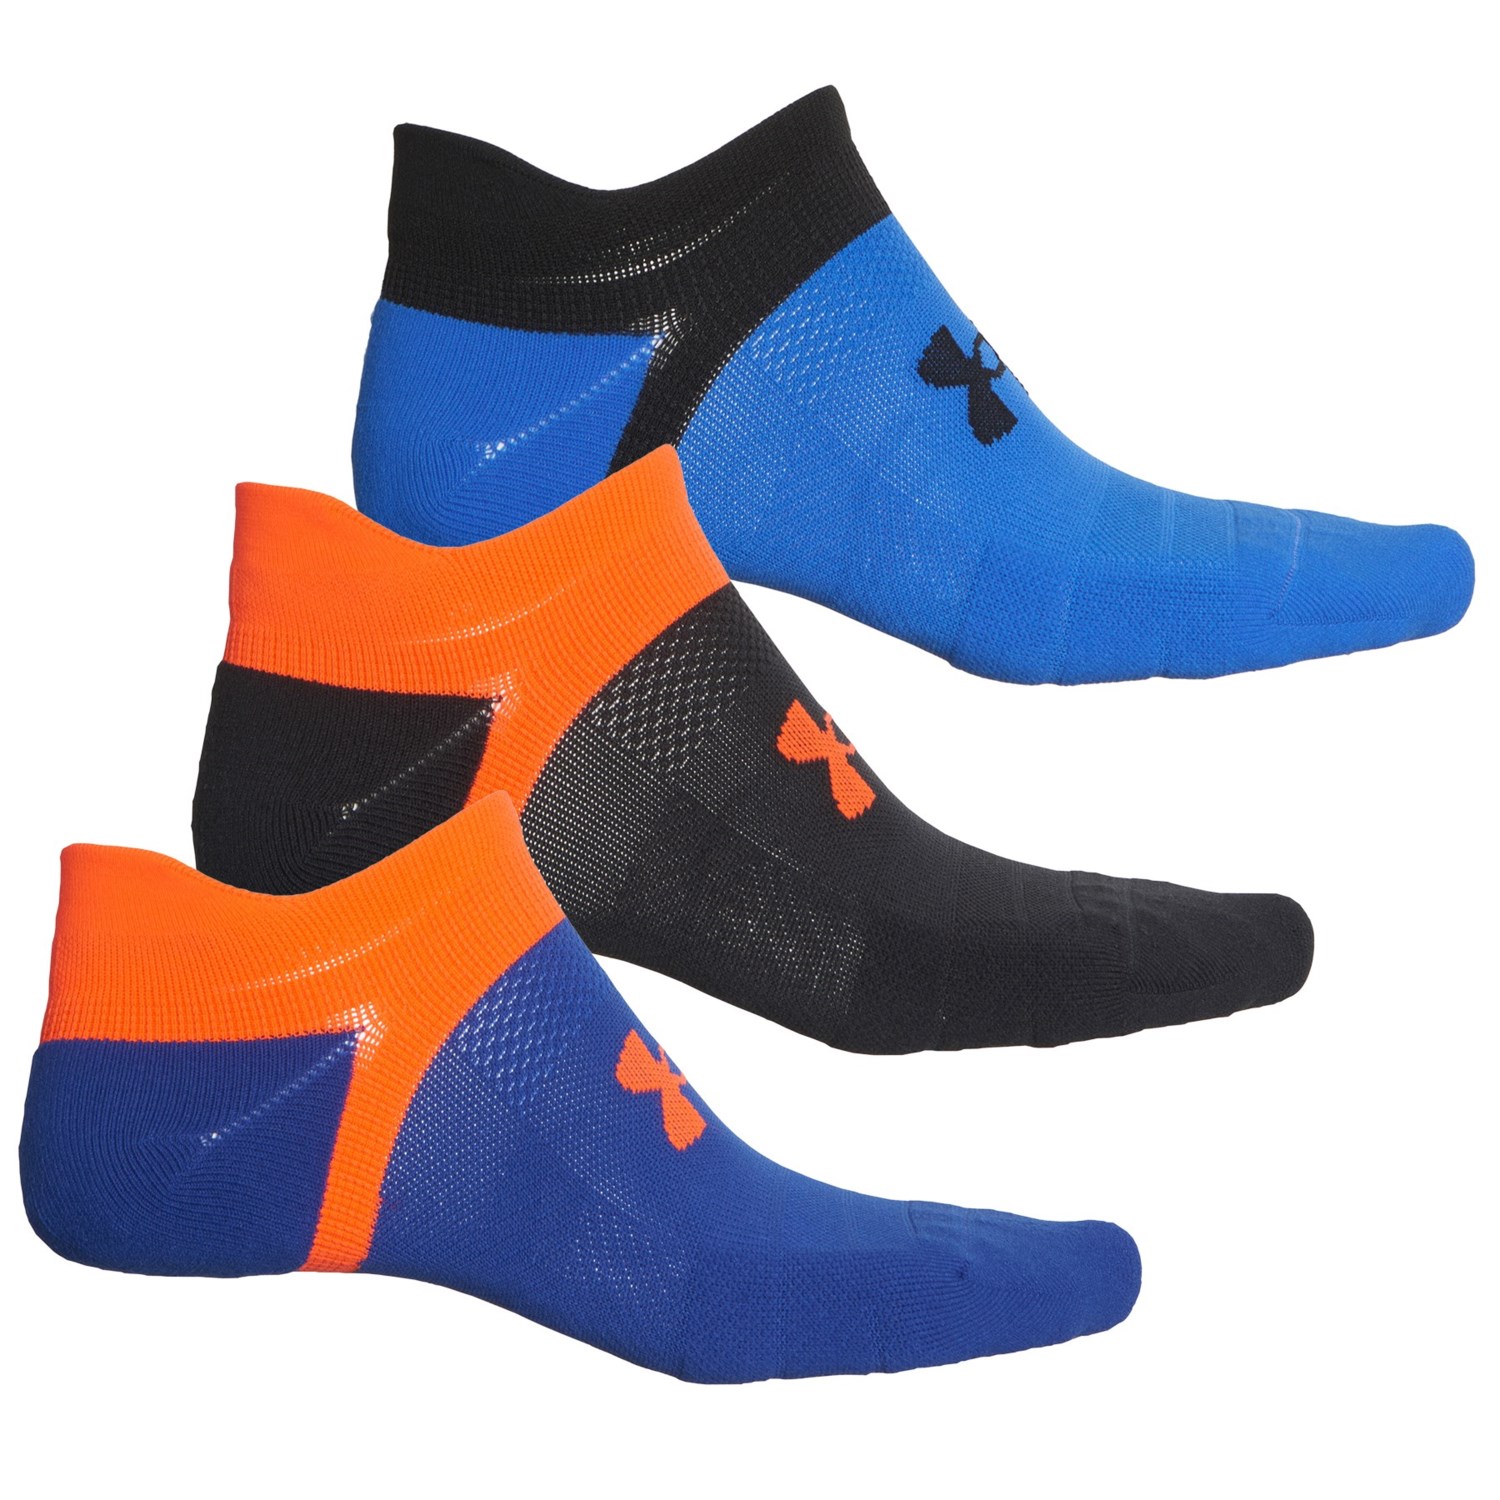 Under Armour ArmourDry Run Lite No-Show Socks - 3-Pack, Below the Ankle (For Men)